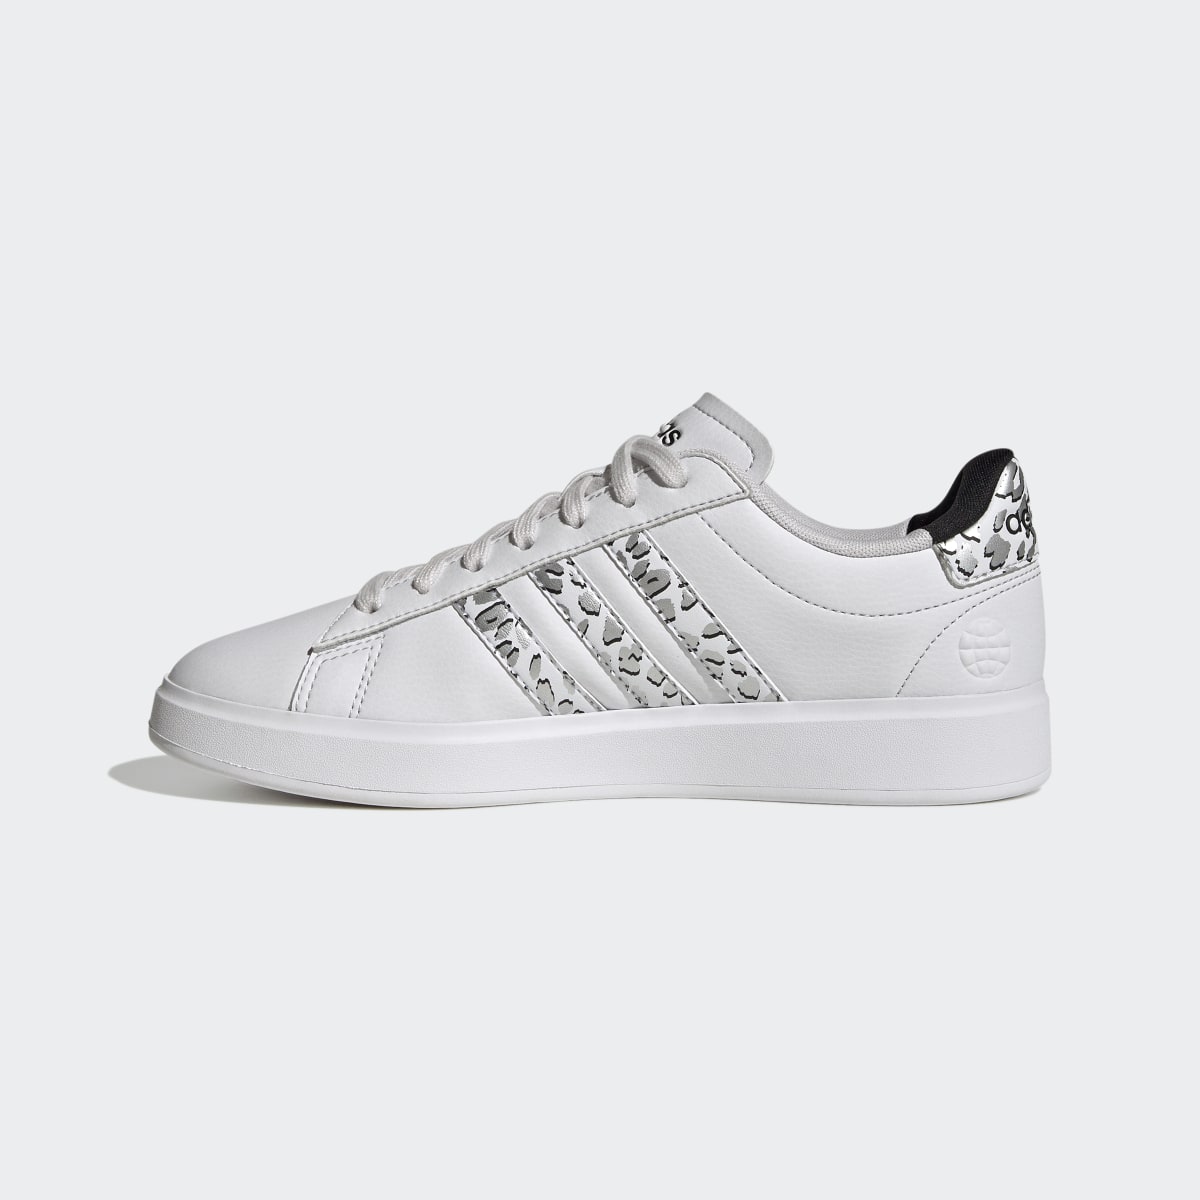 Adidas Grand Court Cloudfoam Lifestyle Court Comfort Style Shoes. 7